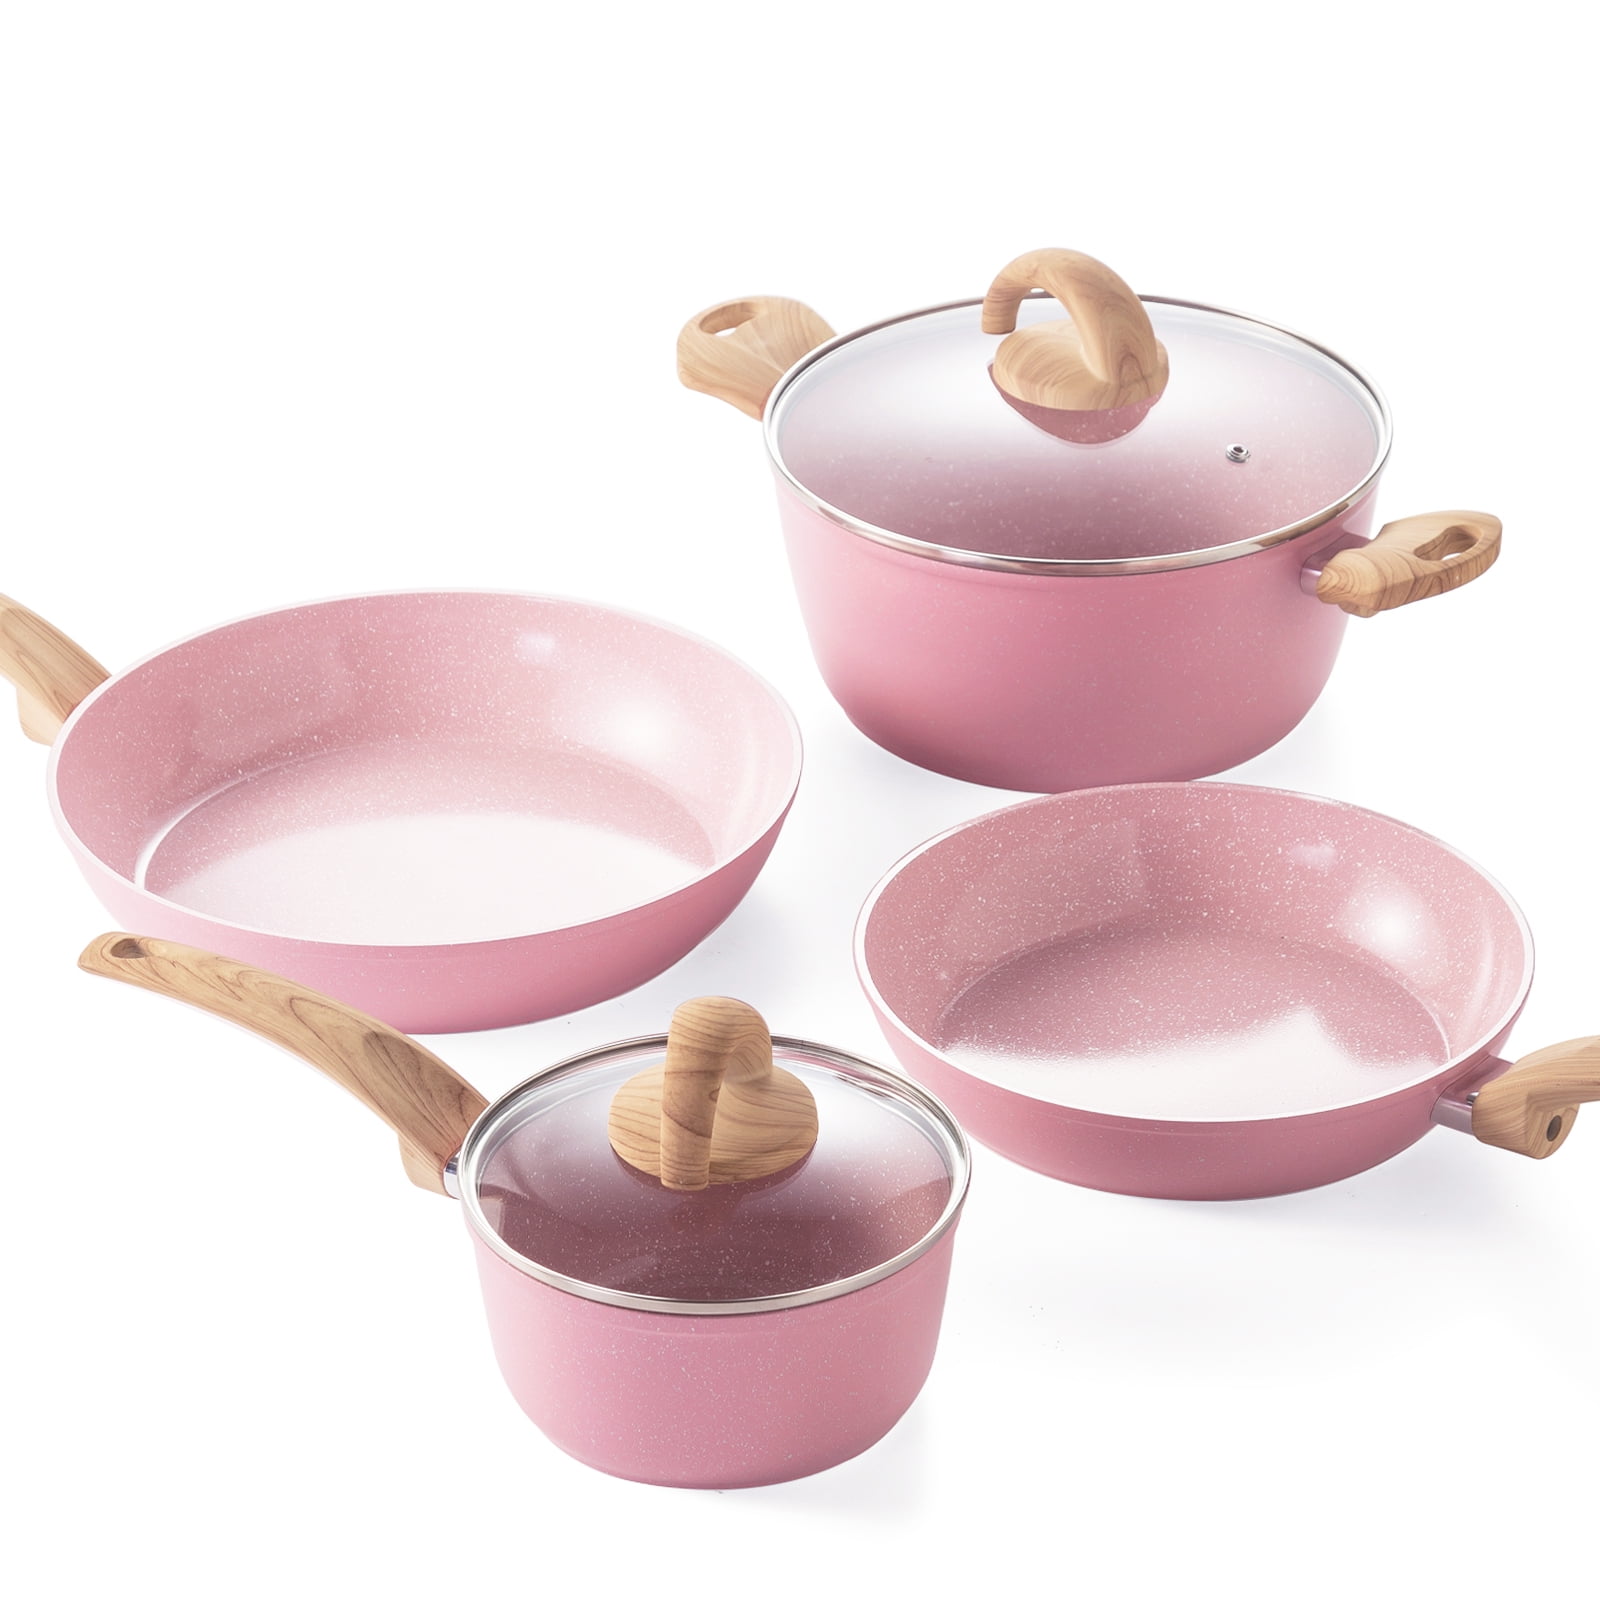 Vkoocy Pink Pots and Pans Set Non Stick, Ceramic Cookware Set Non